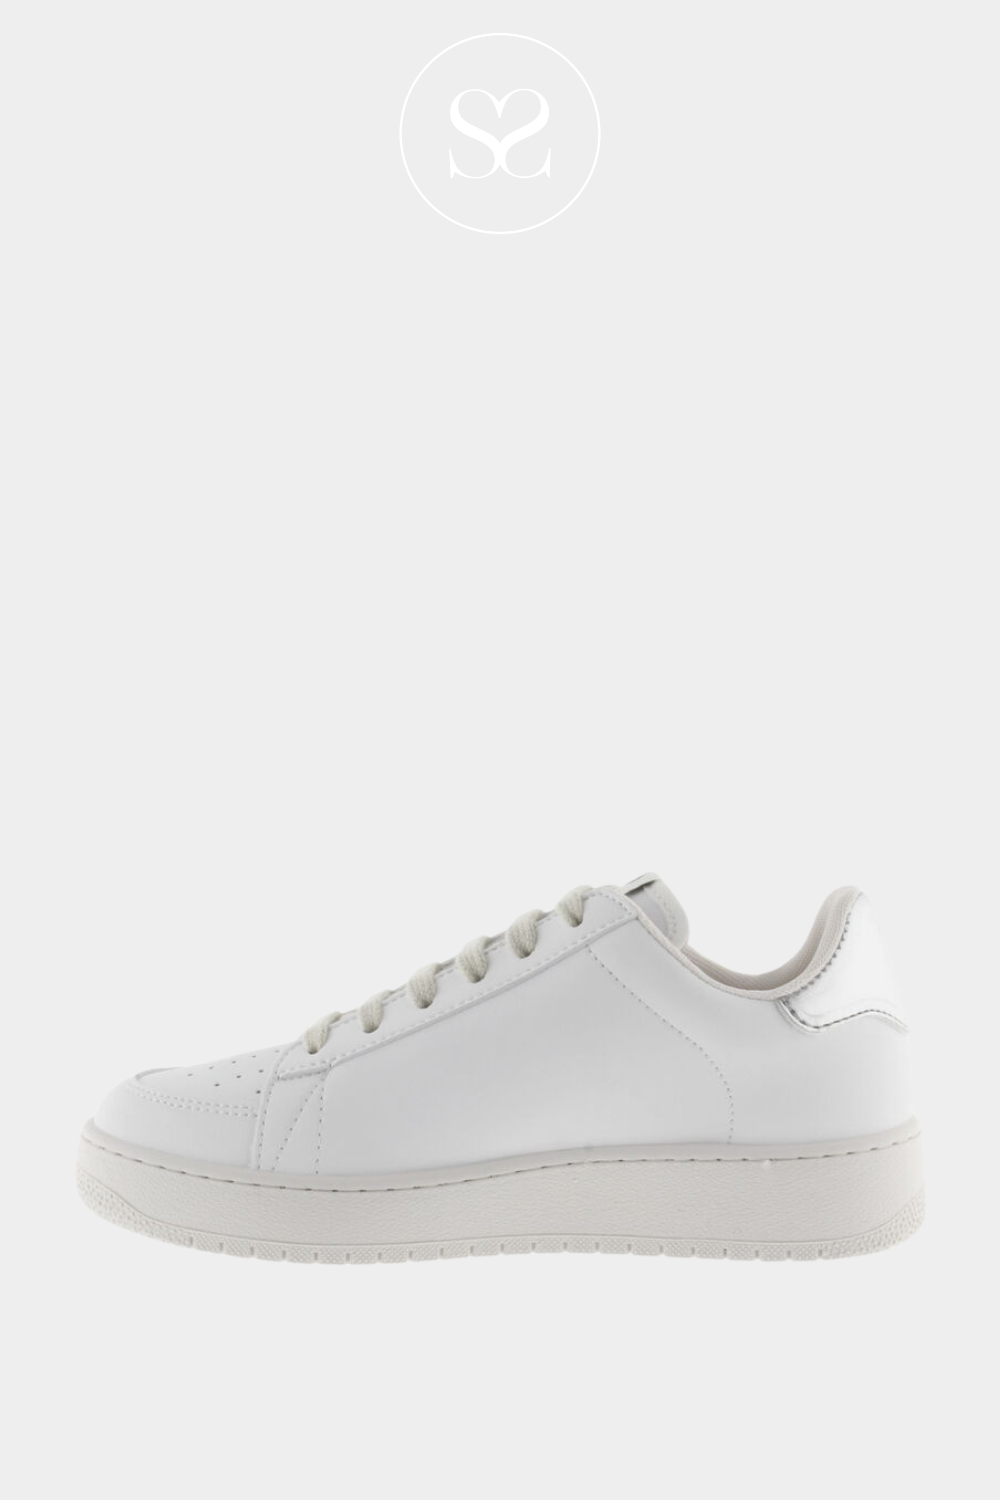 VICTORIA 1-258202 WHITE FLATFORM TRAINERS WITH SILVER V TO THE SIDE, LACES AND AIR HOLES ON THE TOE